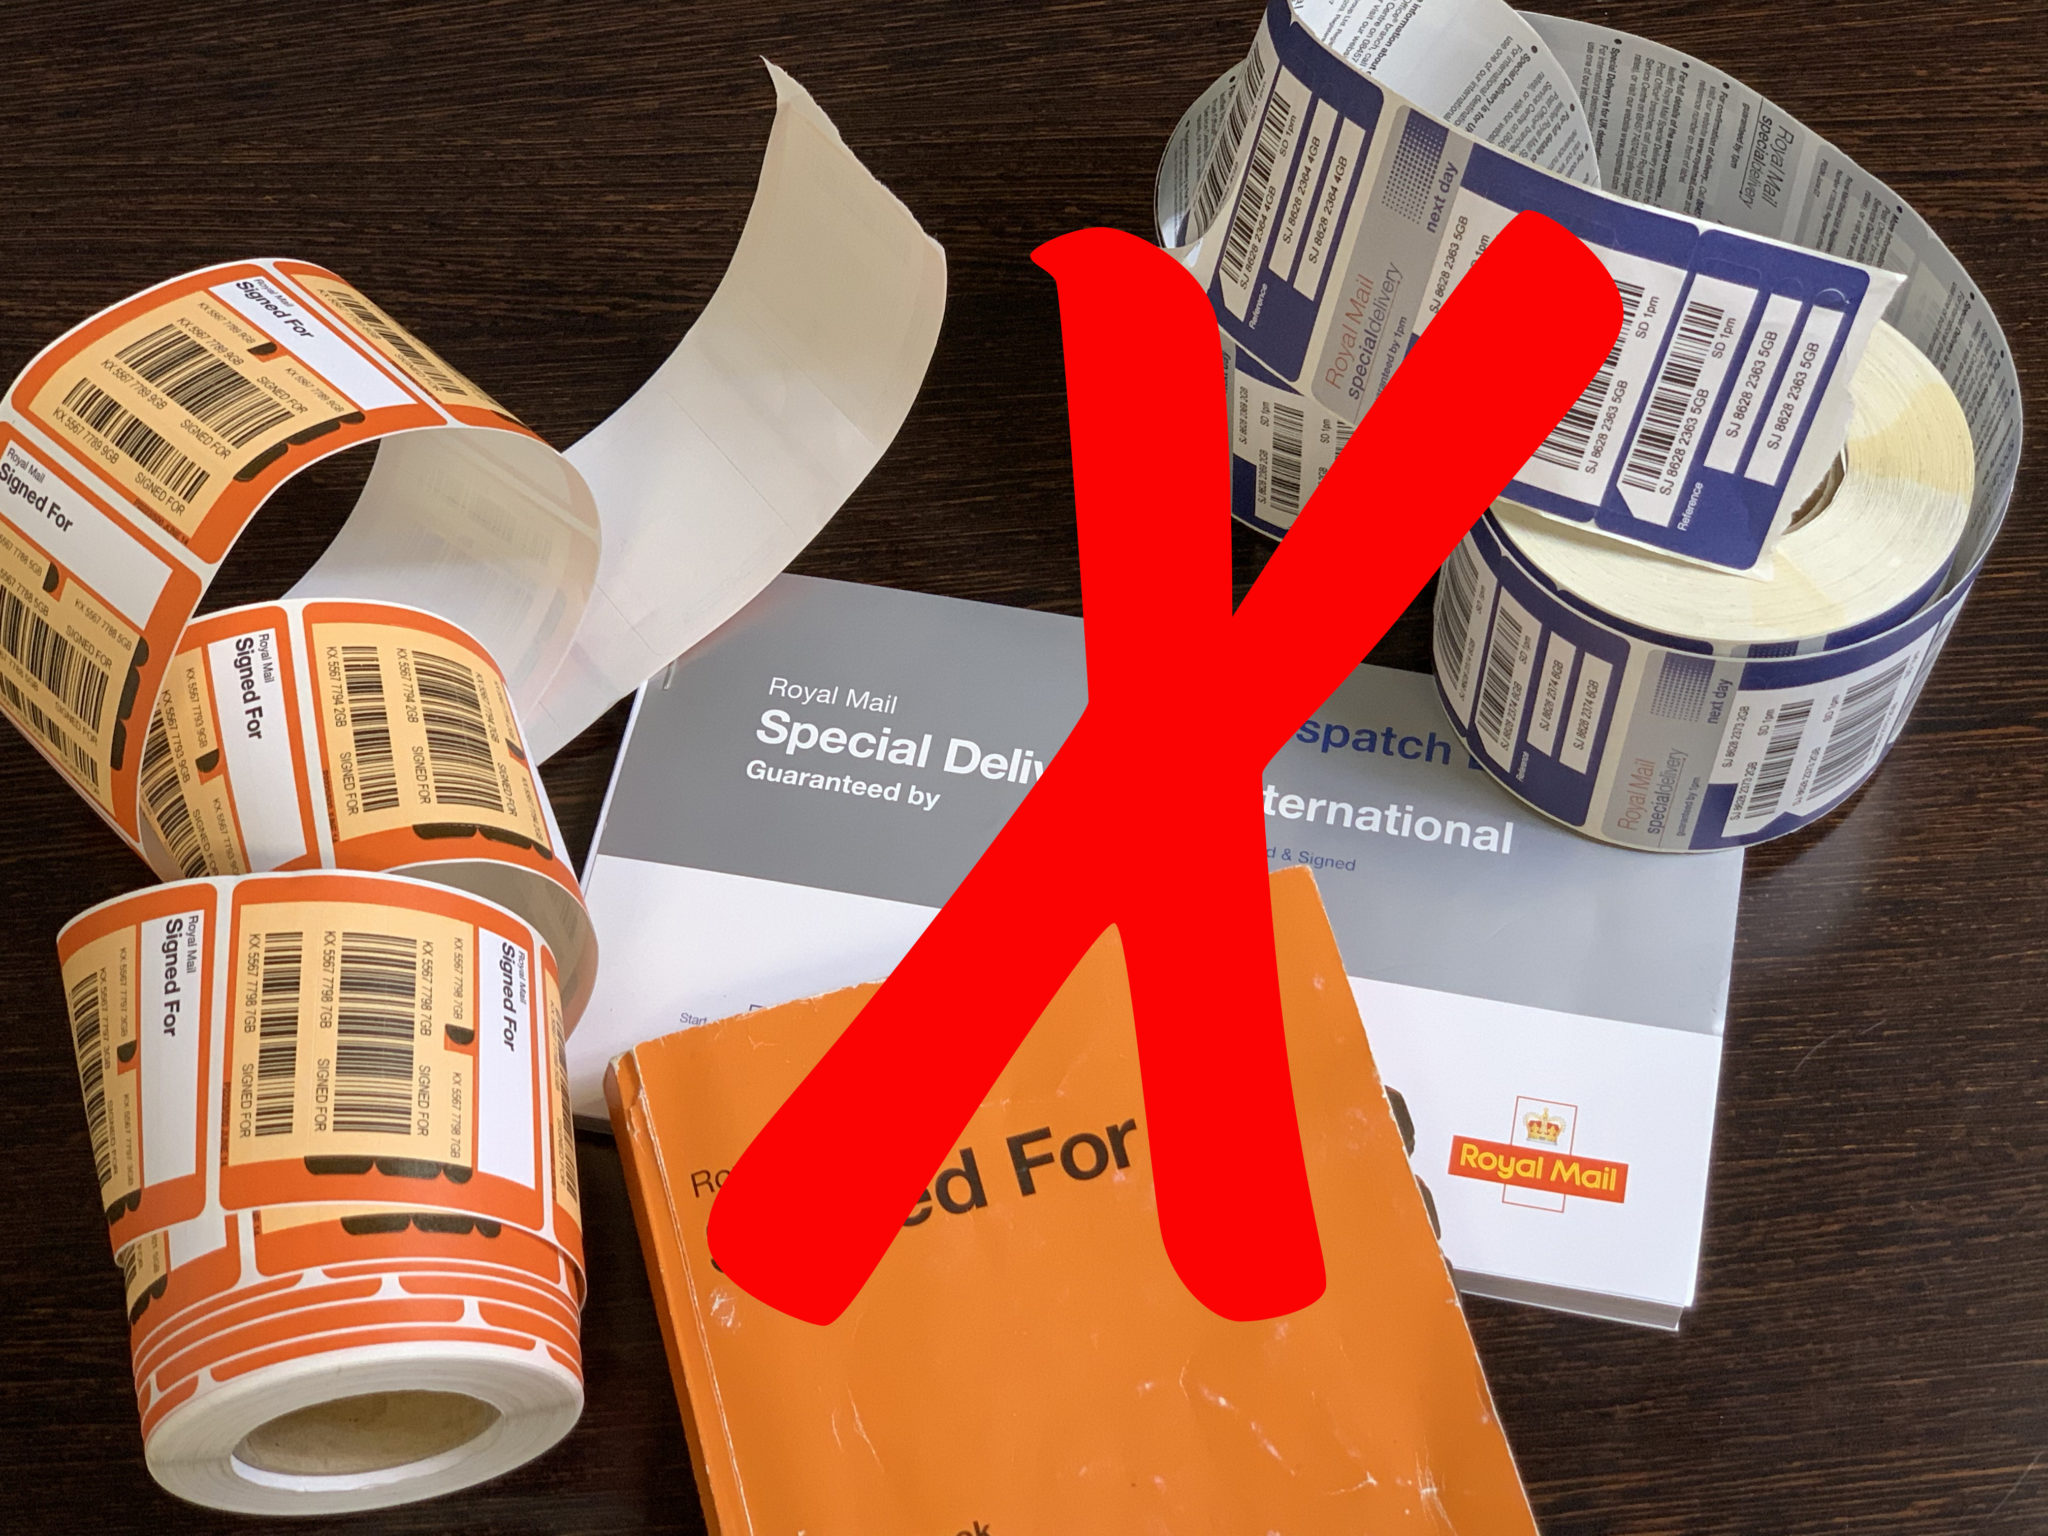 No more Special and Signed For barcode labels and books required